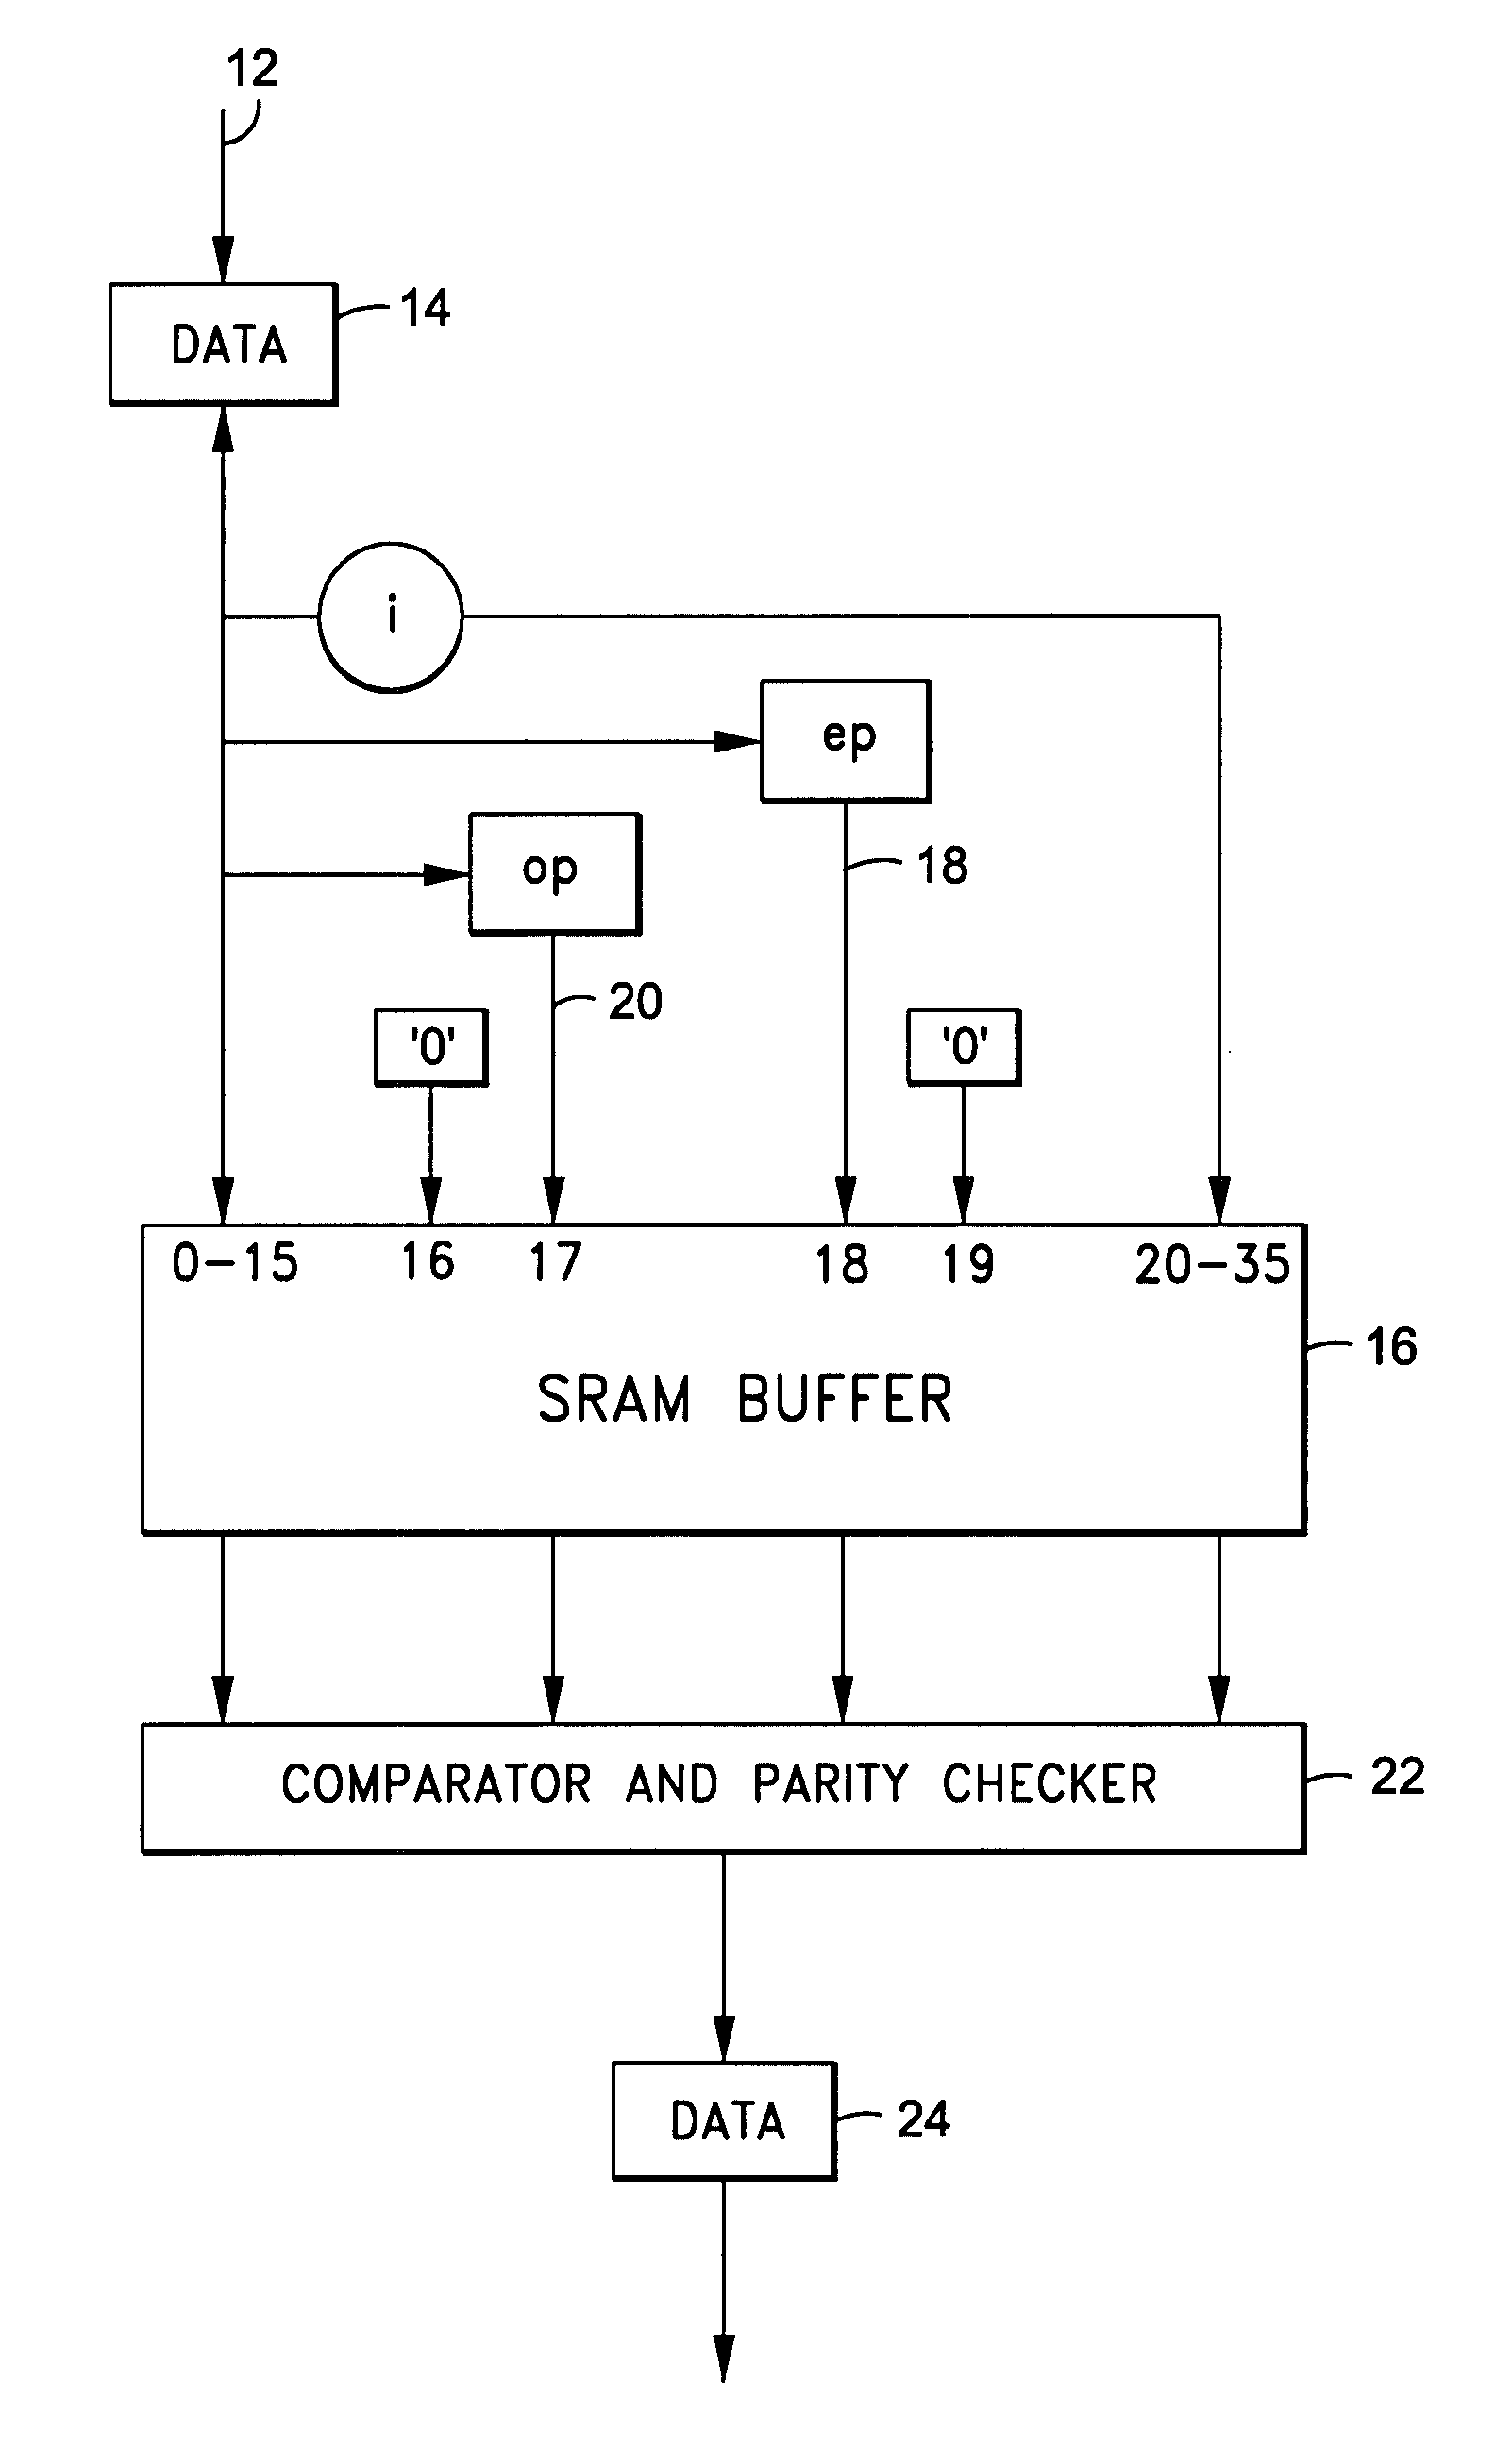 Multiple bit upset insensitive error detection and correction circuit for field programmable gate array based on static random access memory blocks